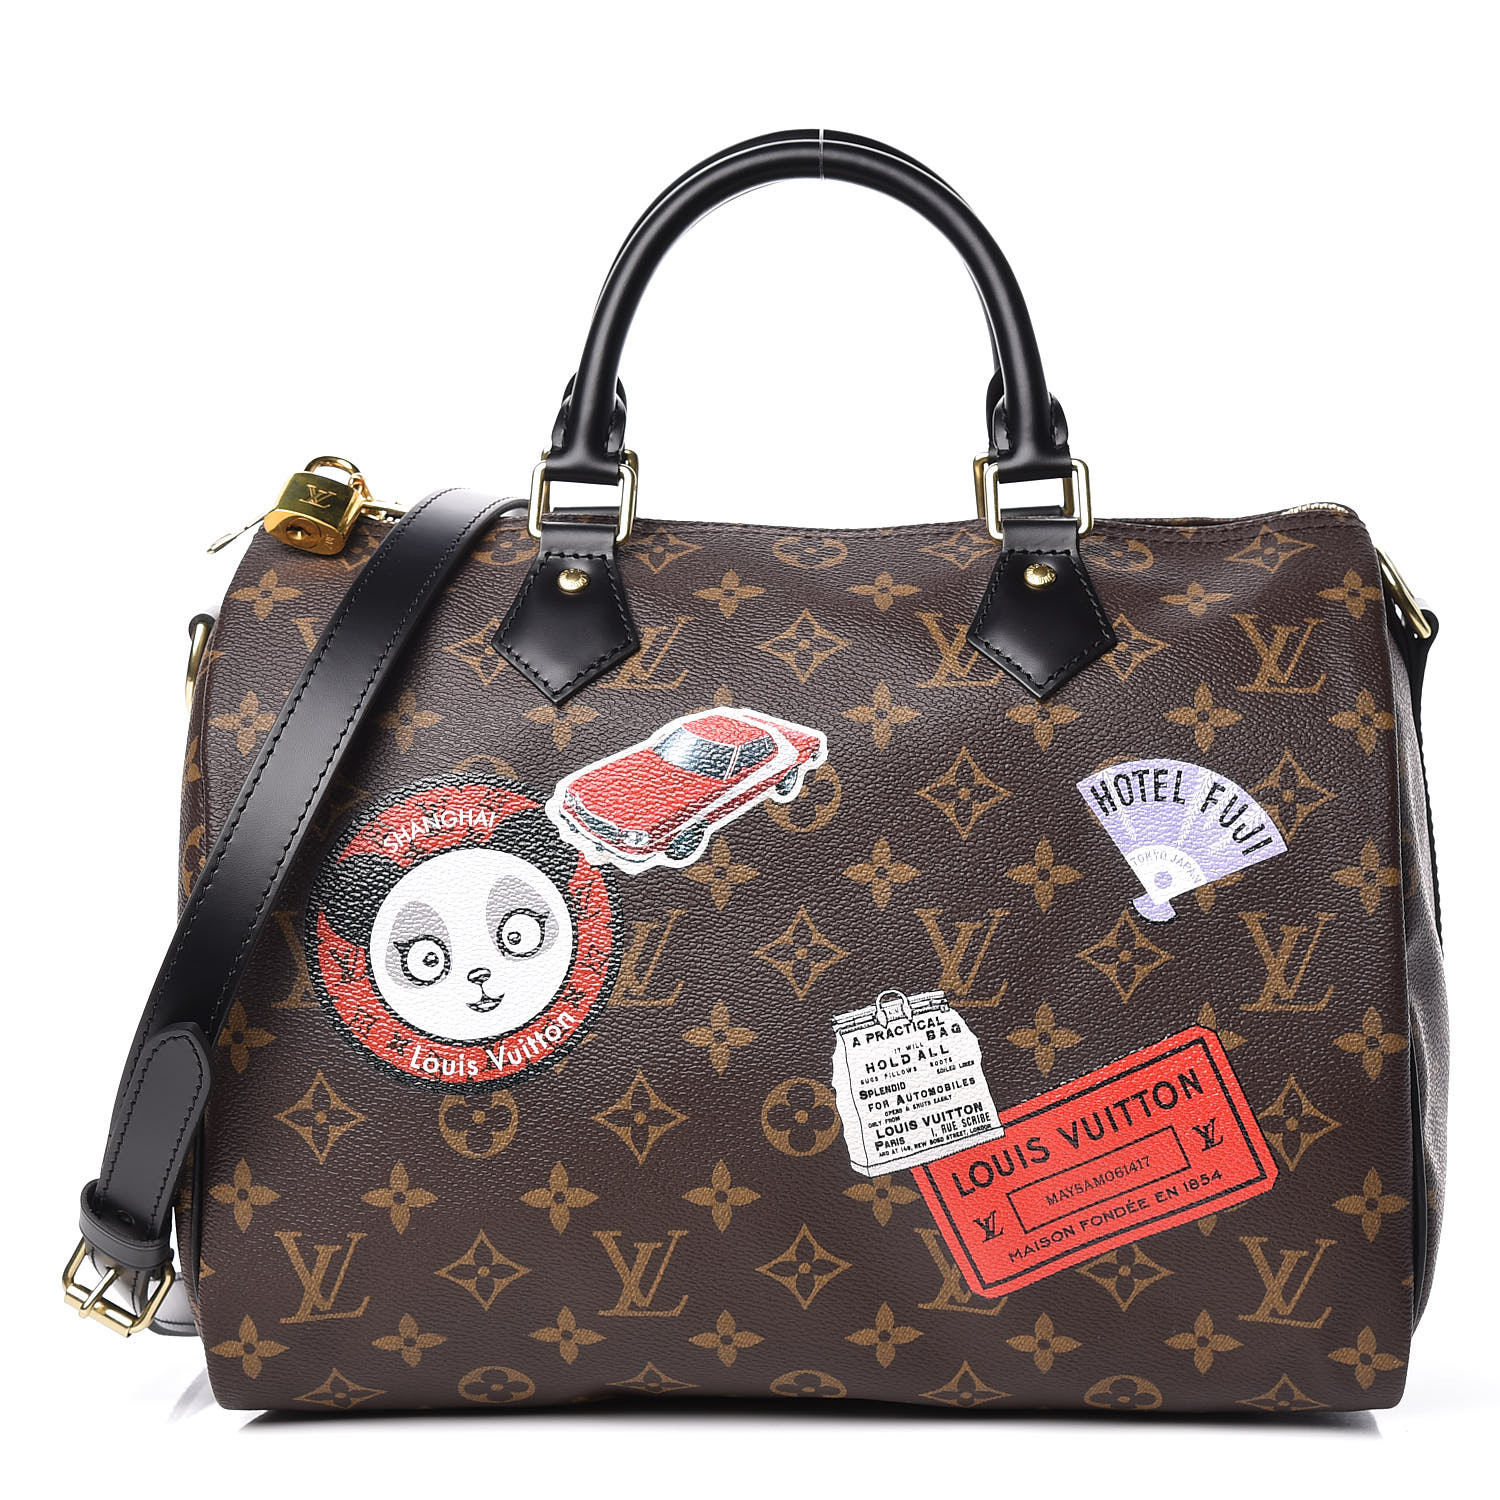 Personalize your Louis Vuitton with Mon Monogram - PurseBlog  Louis vuitton  monogram, Louis vuitton, Louis vuitton luggage